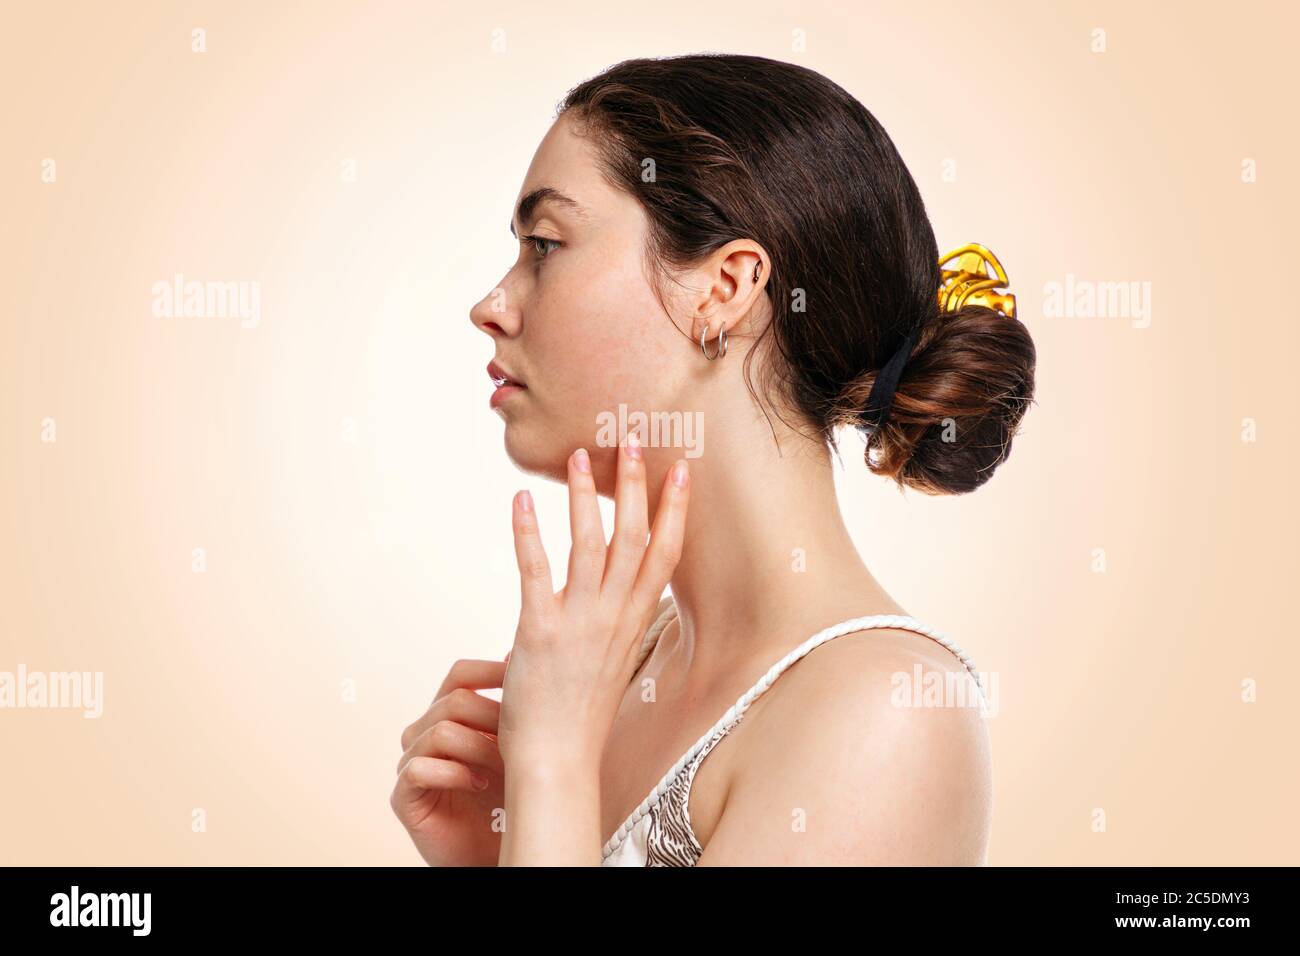 A young beautiful woman holds her hand to her face.Side view. Beige background. Copy space.Concept of rejuvenation, beauty and cosmetology. Stock Photo